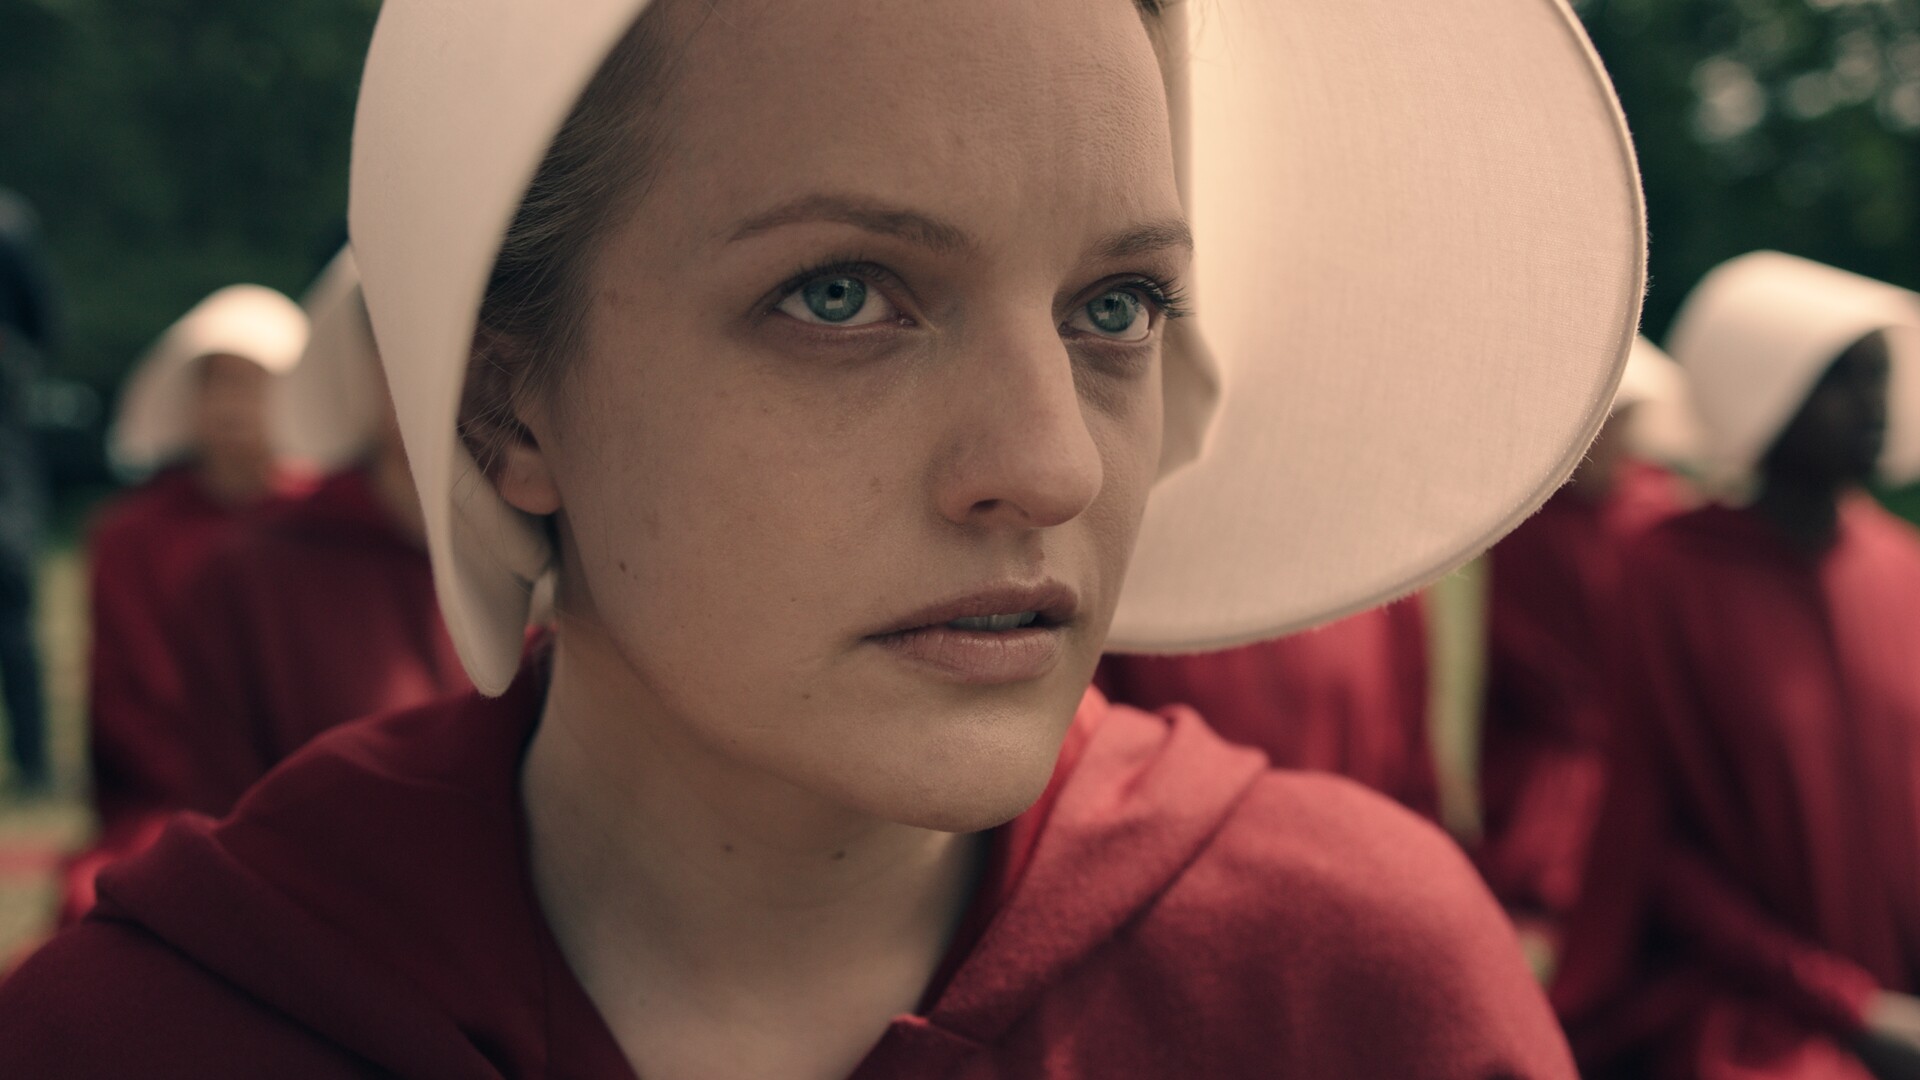 The Handmaid's Tale: Elisabeth Moss, Awarded the Primetime Emmy Award for Outstanding Lead Actress in a Drama Series. 1920x1080 Full HD Wallpaper.